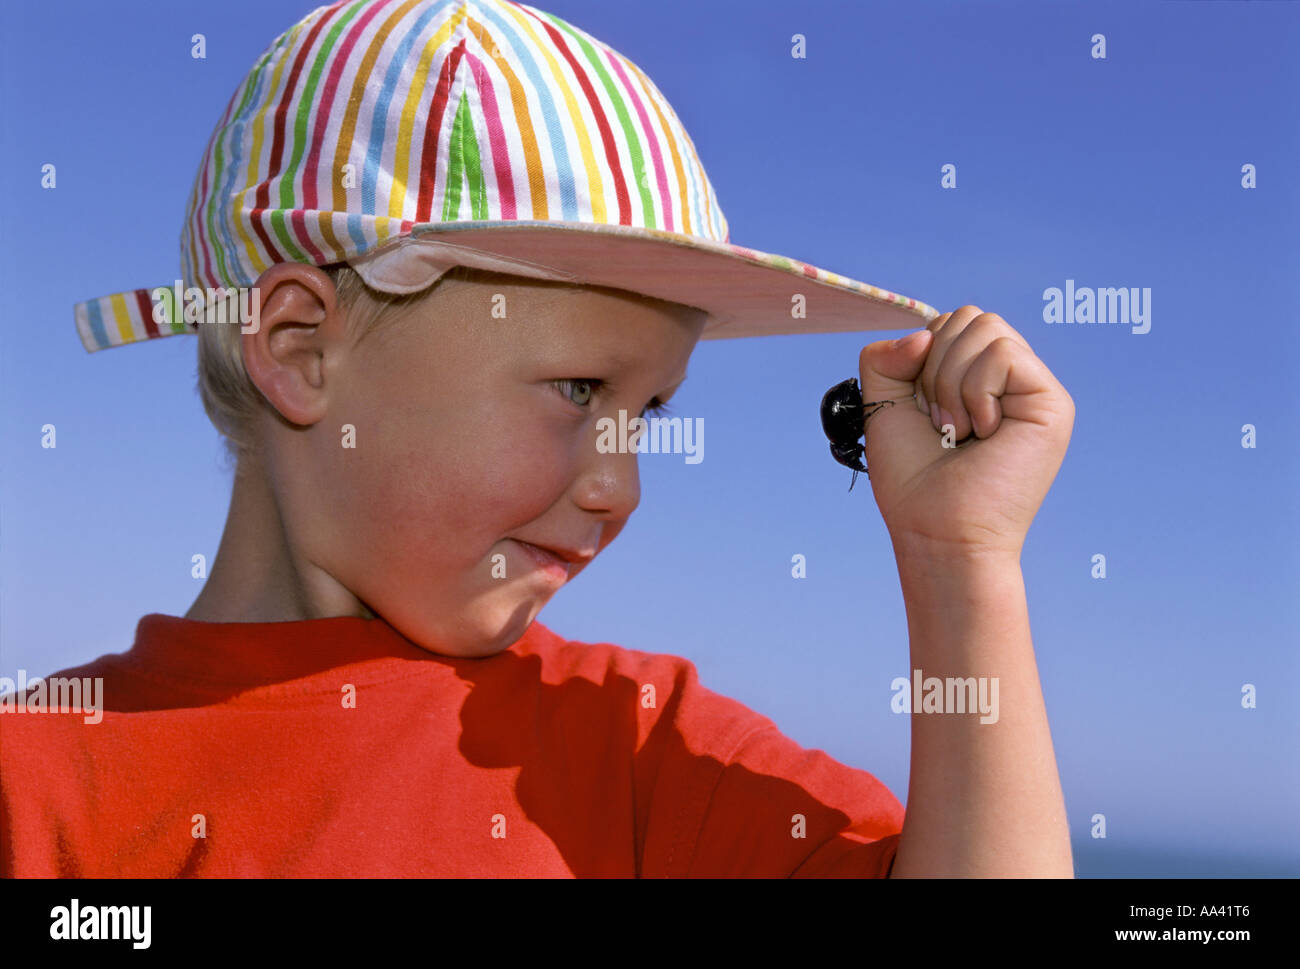 Little boy four years old looking at a black beetle on his hand Stock Photo